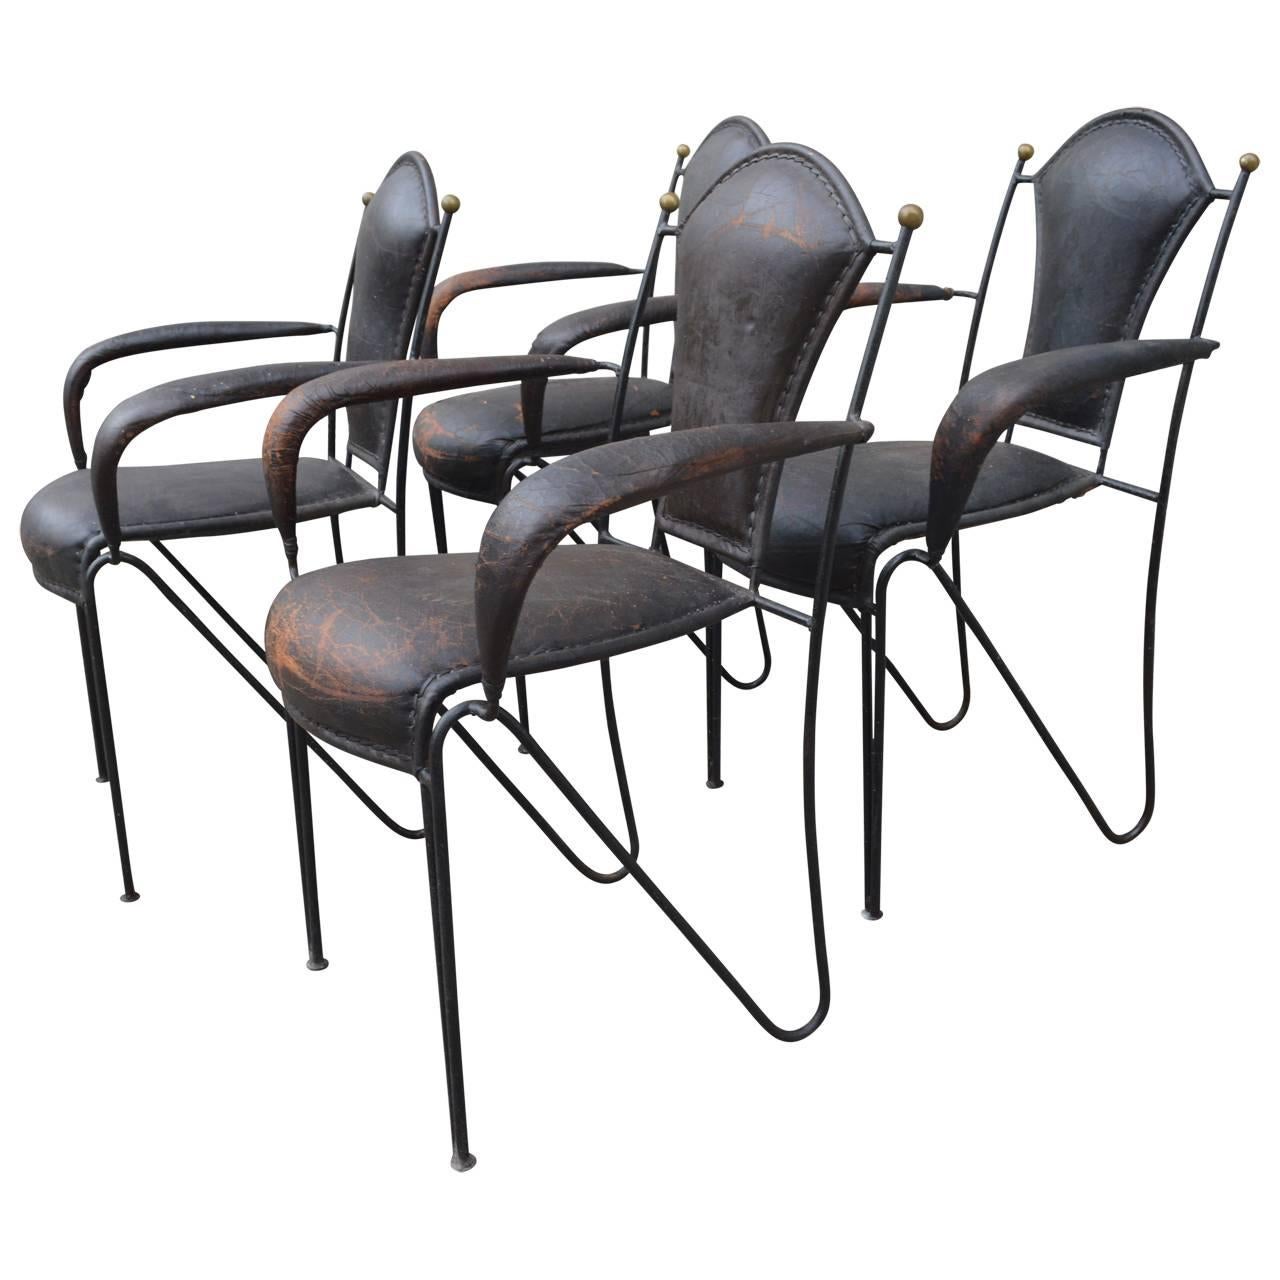 Four French 1950s armchairs, in the original vintage leather by Adnet or Matègot.